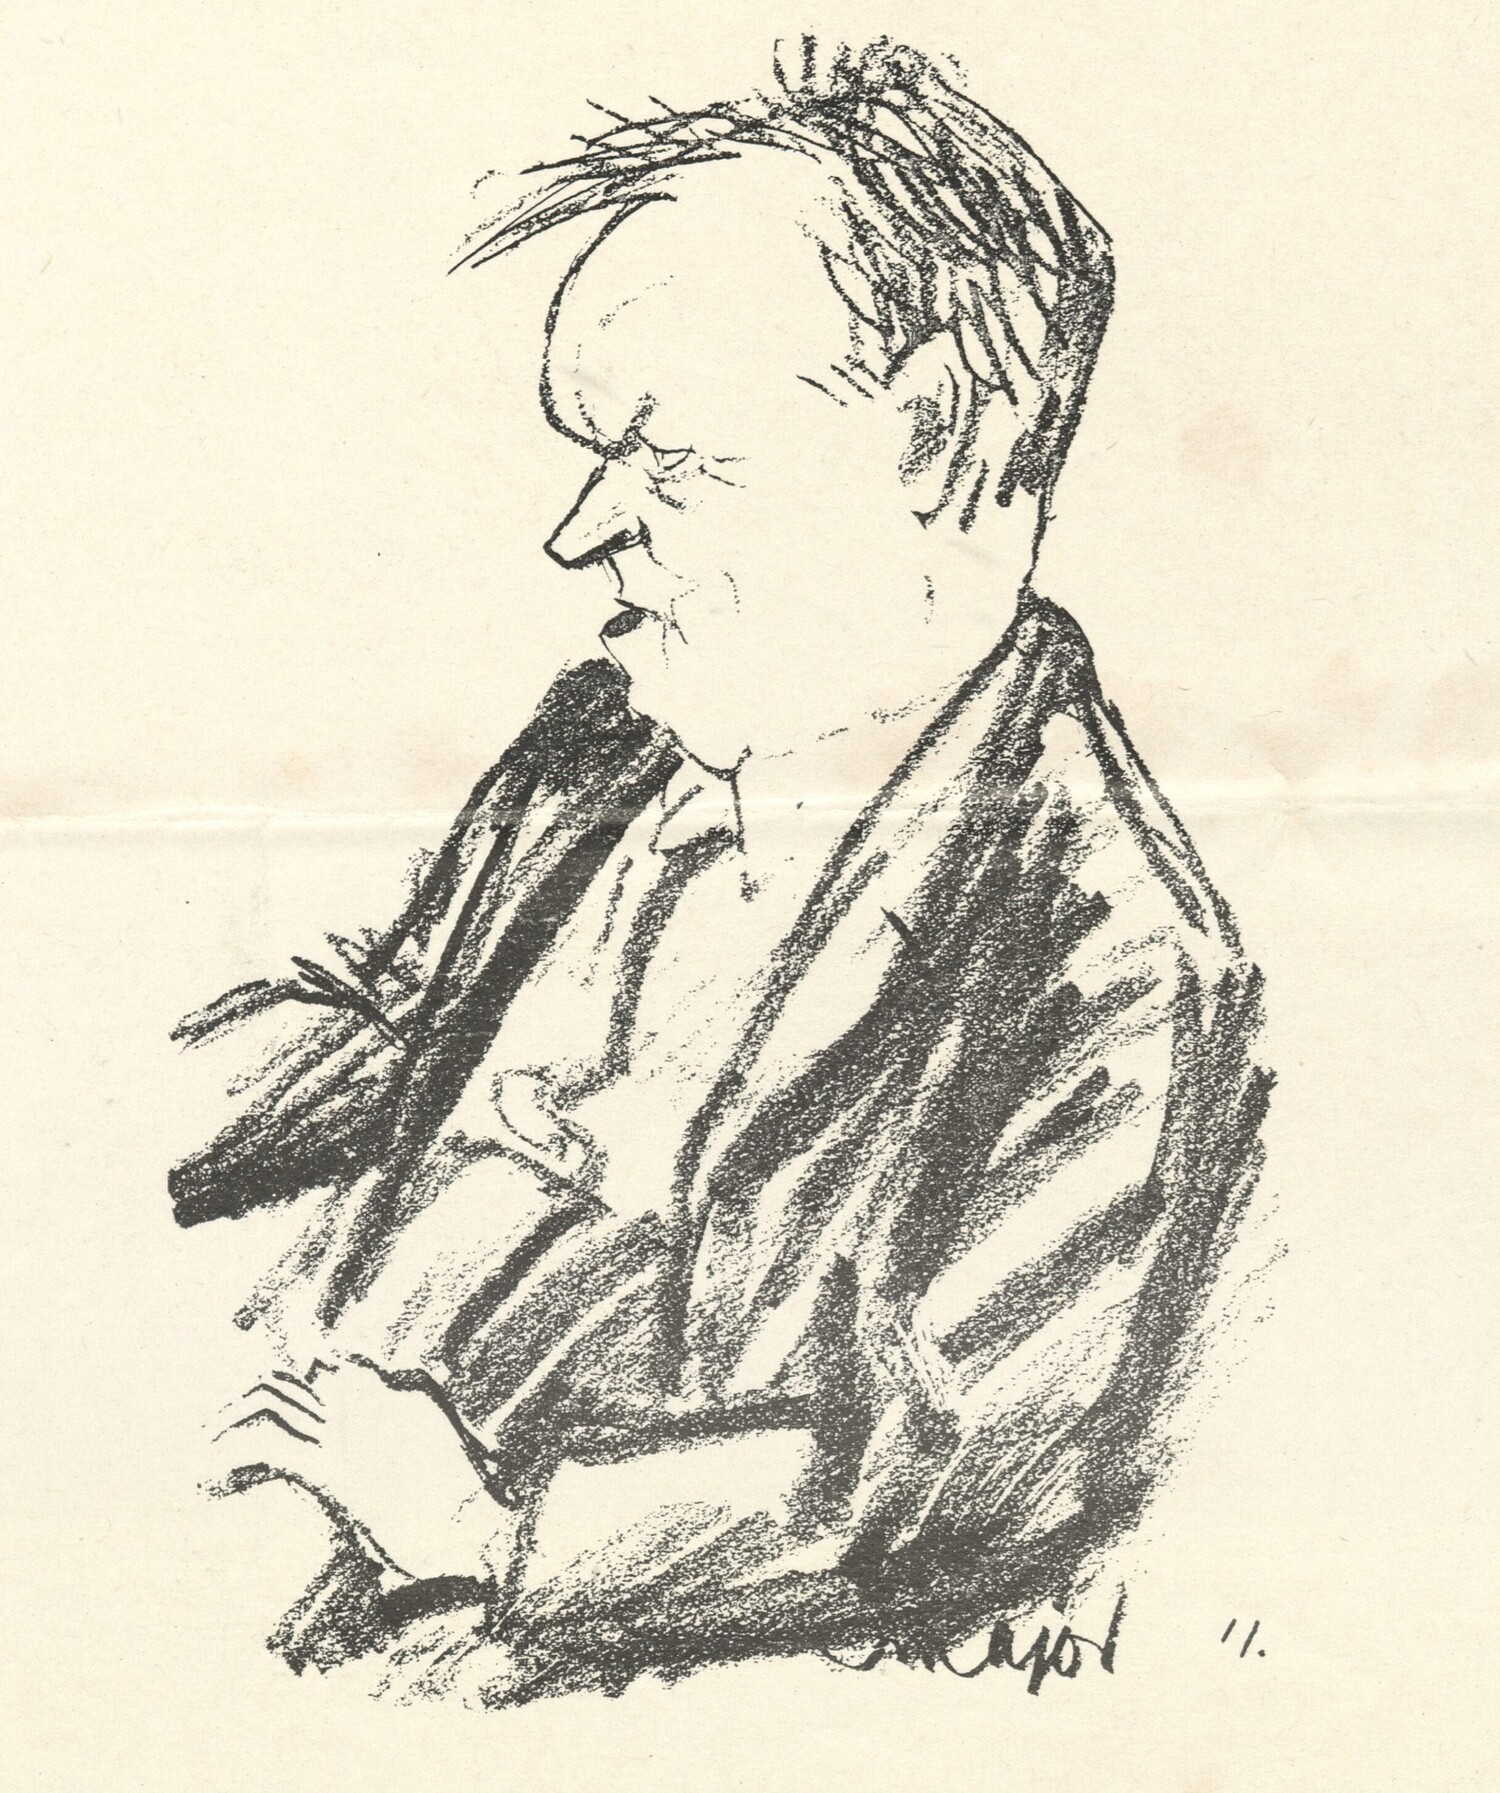 Caricartures-of-Darrow-and-William-Jennings-Bryan-by-Henry-Major-c.-1925-2.jpg